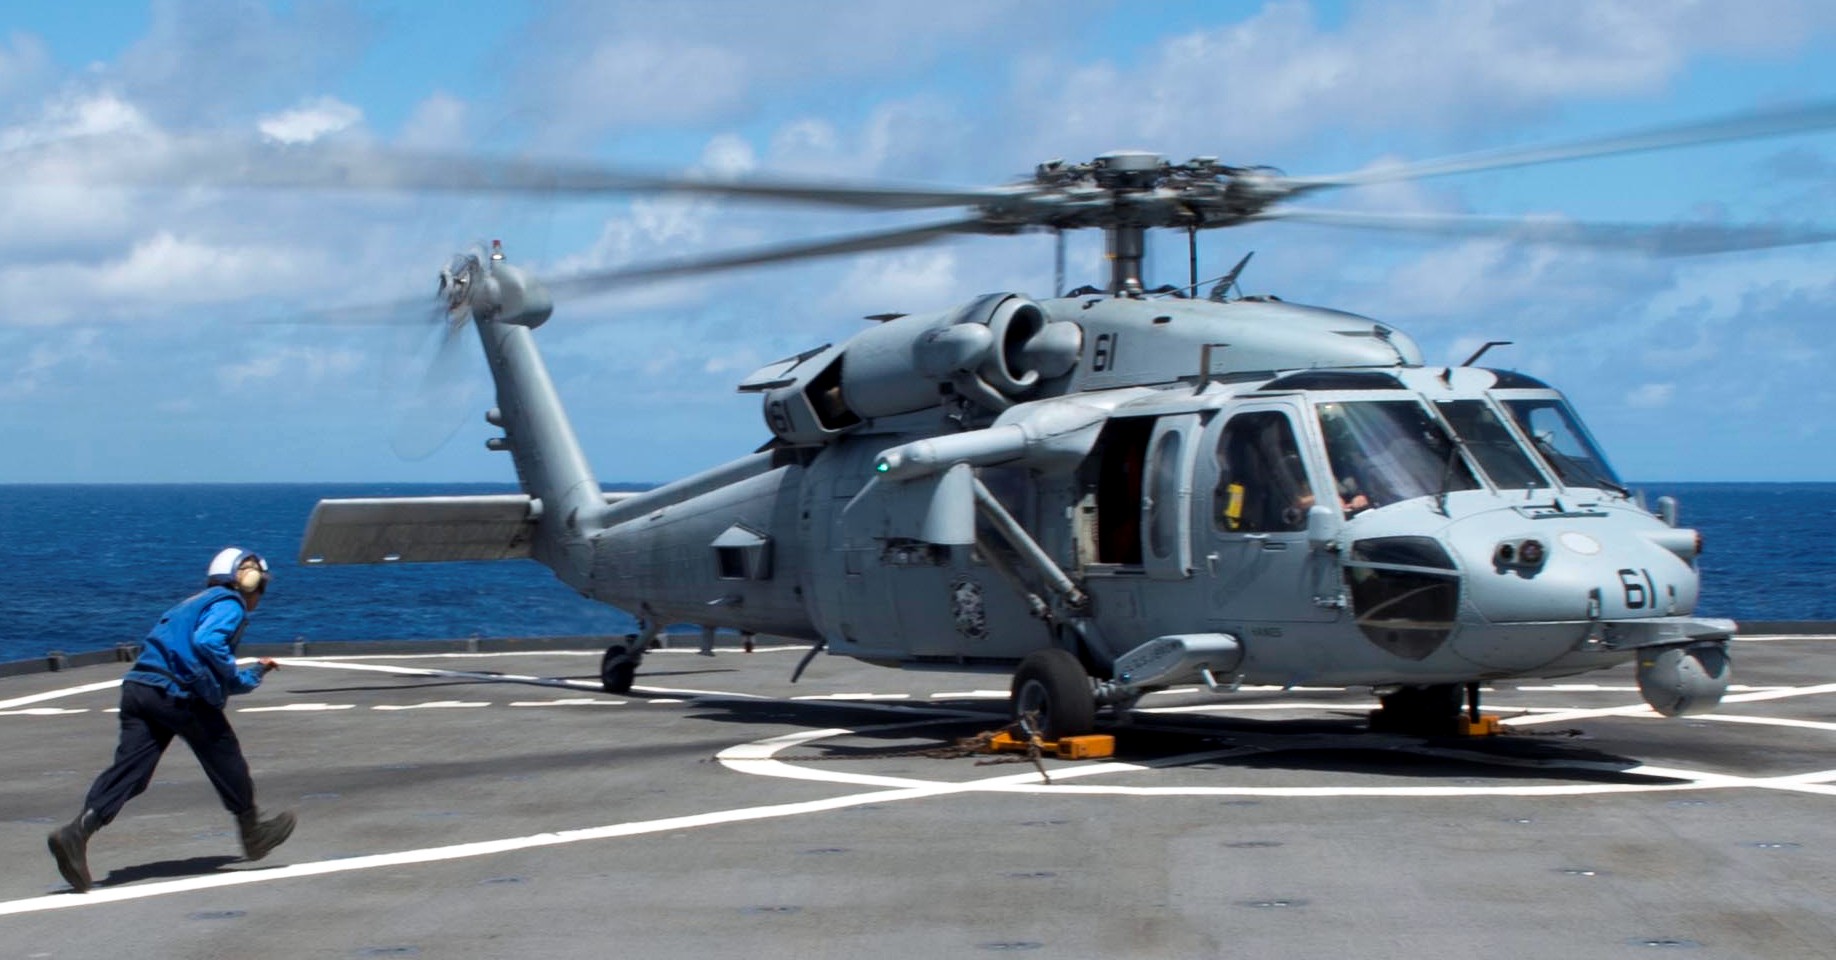 hsc-4 black knights helicopter sea combat squadron us navy mh-60s seahawk 2014 33